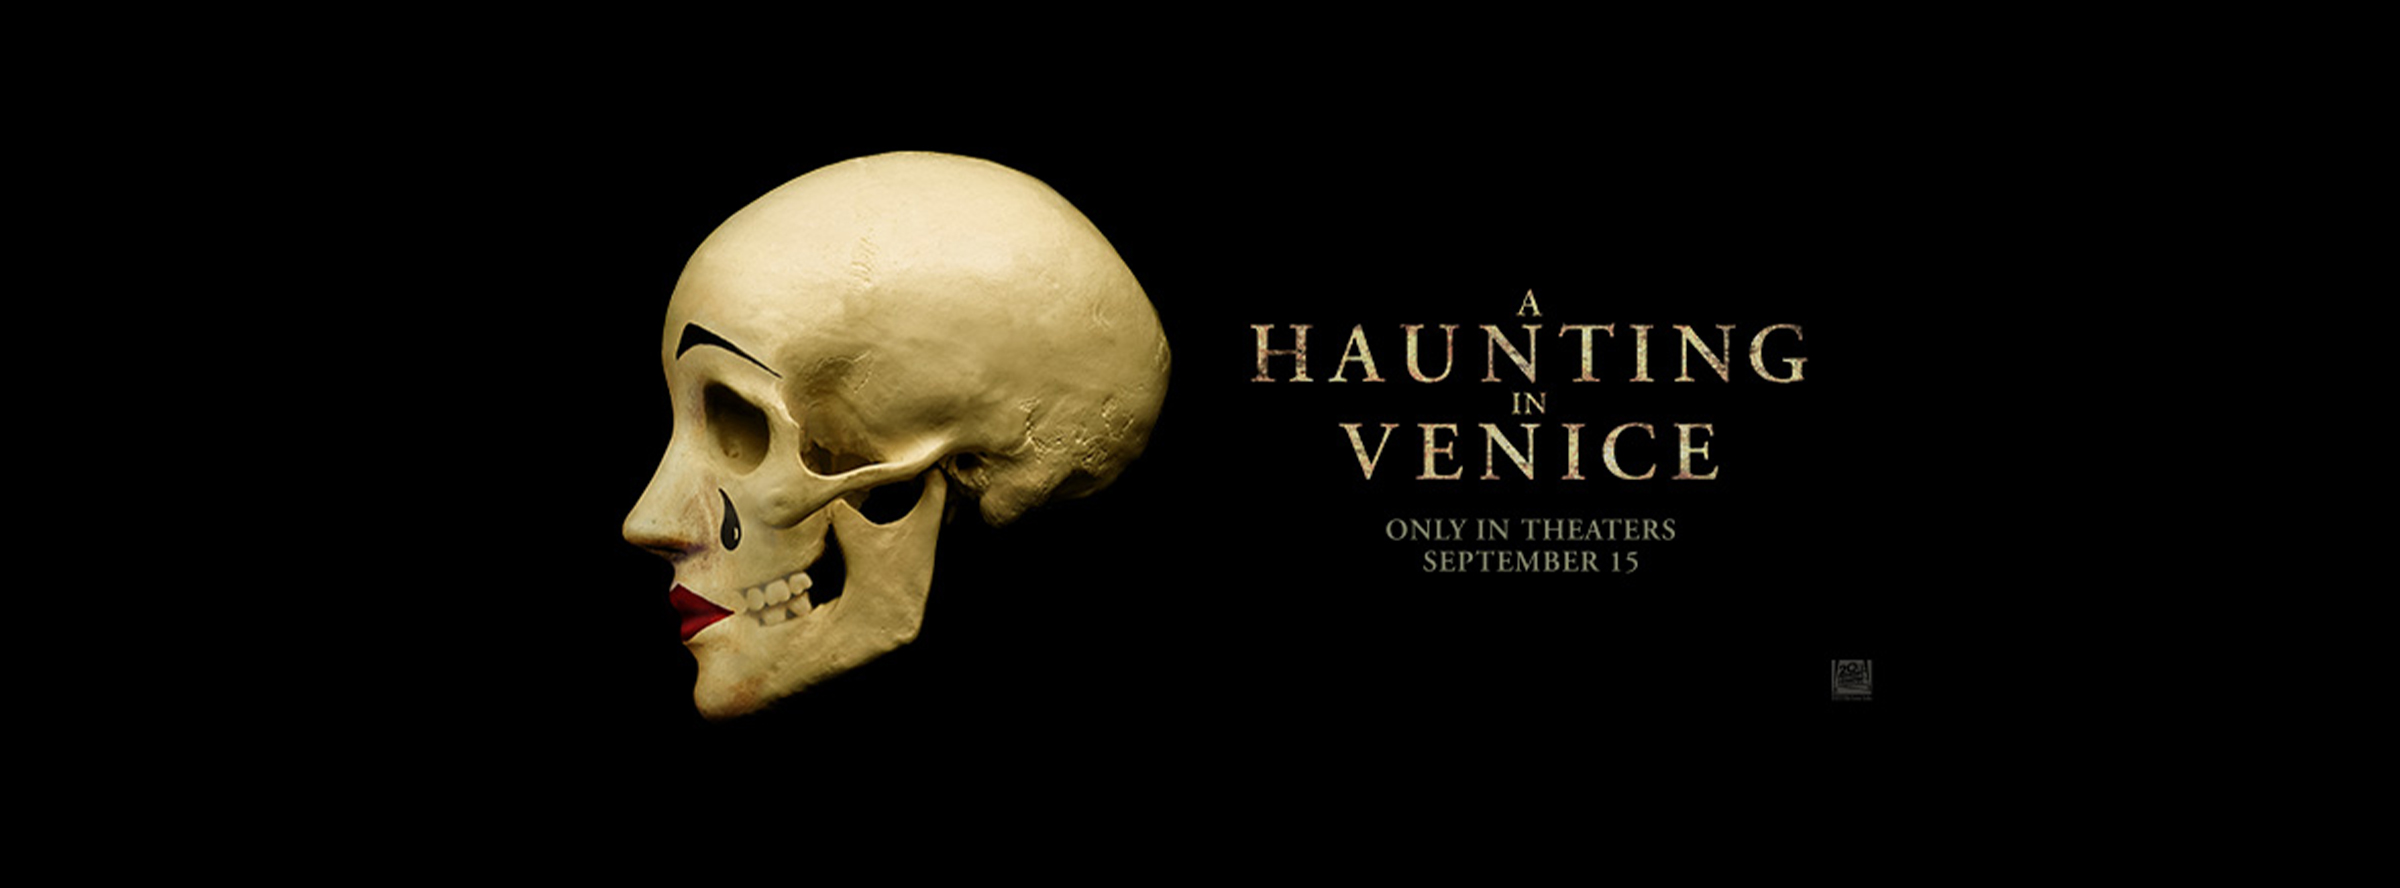 Slider Image for Haunting in Venice, A